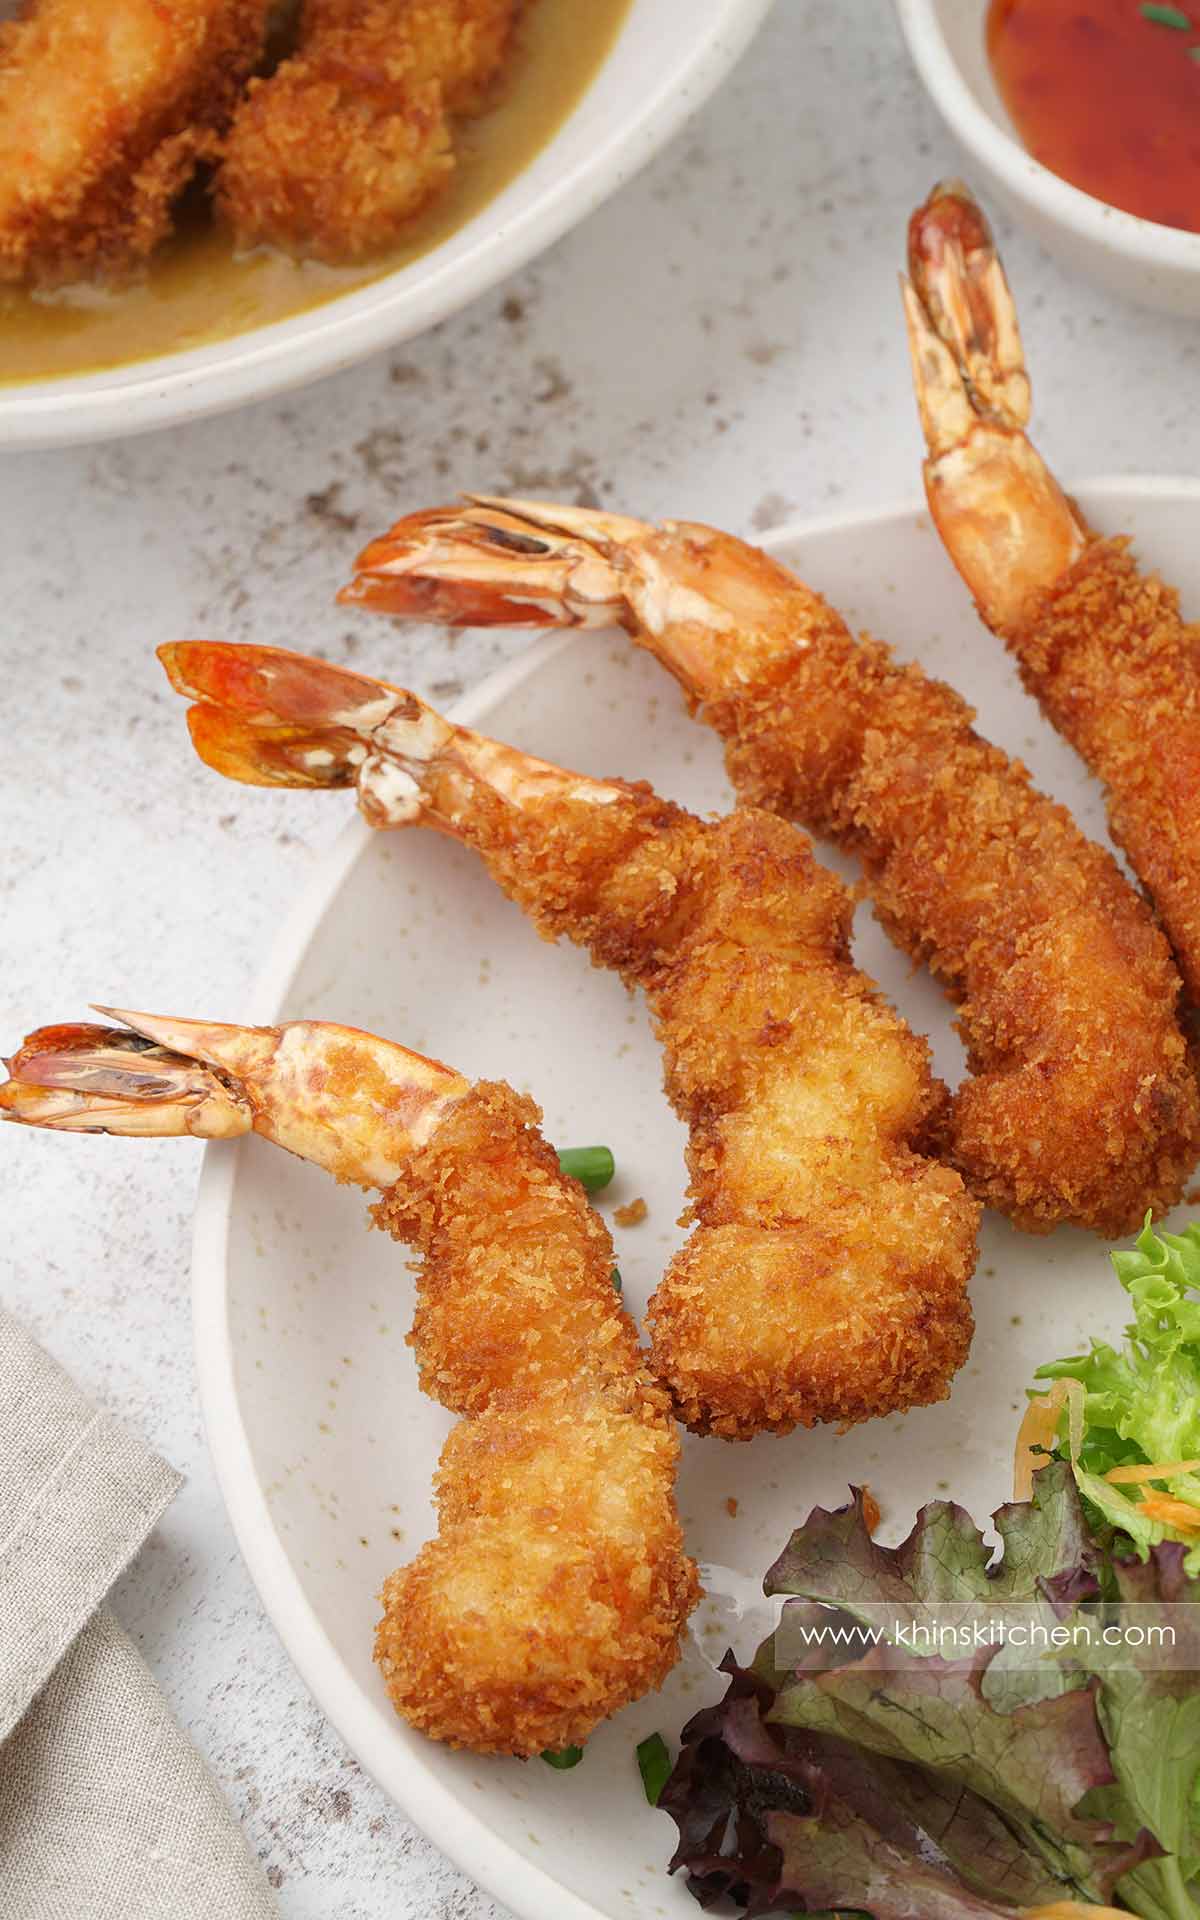 A white plate containing crispy golden ebi fry with salad on the side.